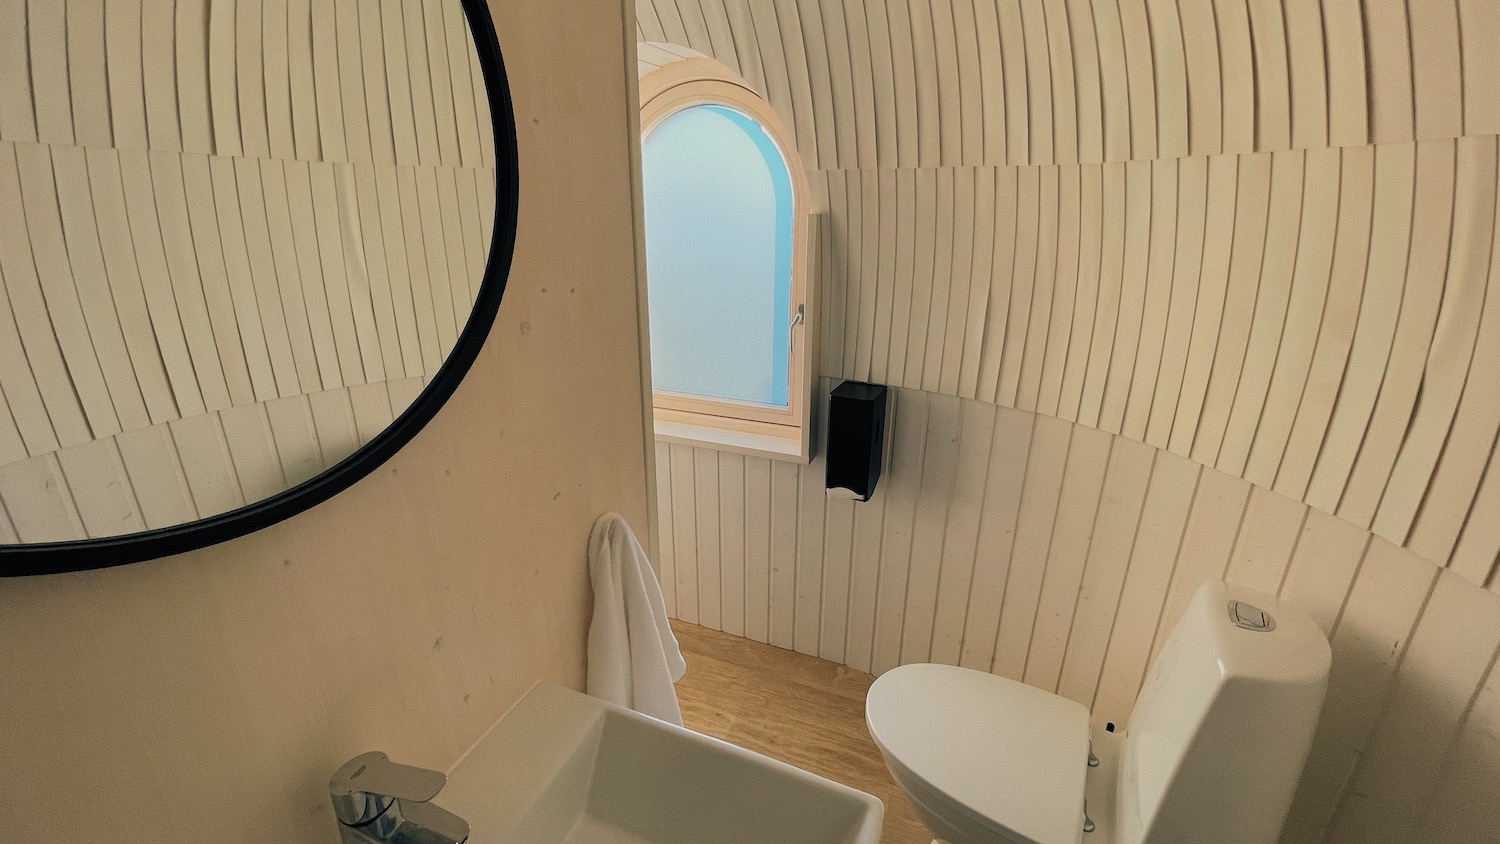 Best holiday homes cabins in Estonia, igloo house at Iglupark in Noblessner